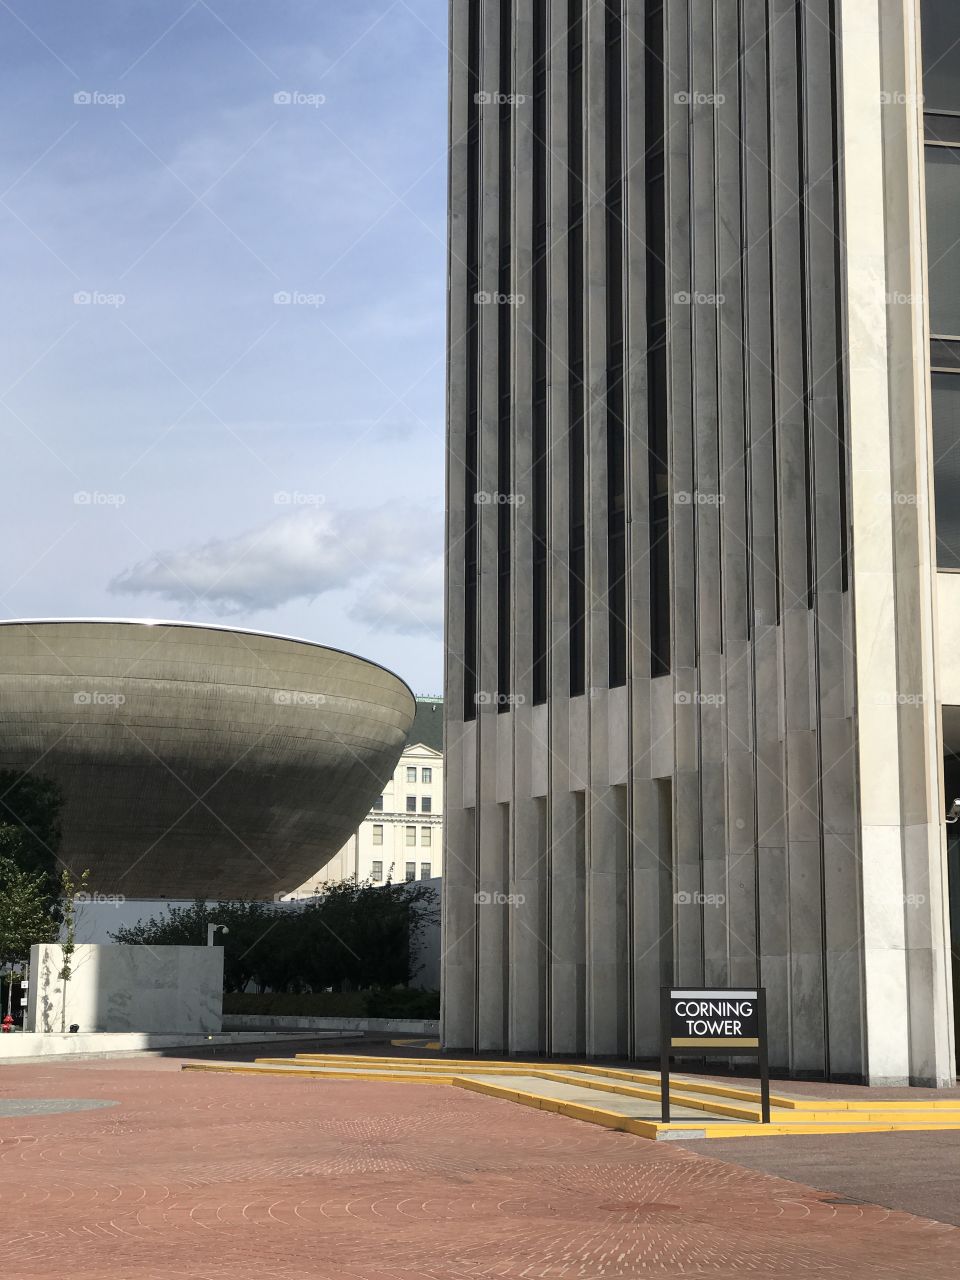 The base of the mayor Erastus Corning Tower. The landmark "The Egg" is in this shot too. Empire State plaza, Albany NY. 